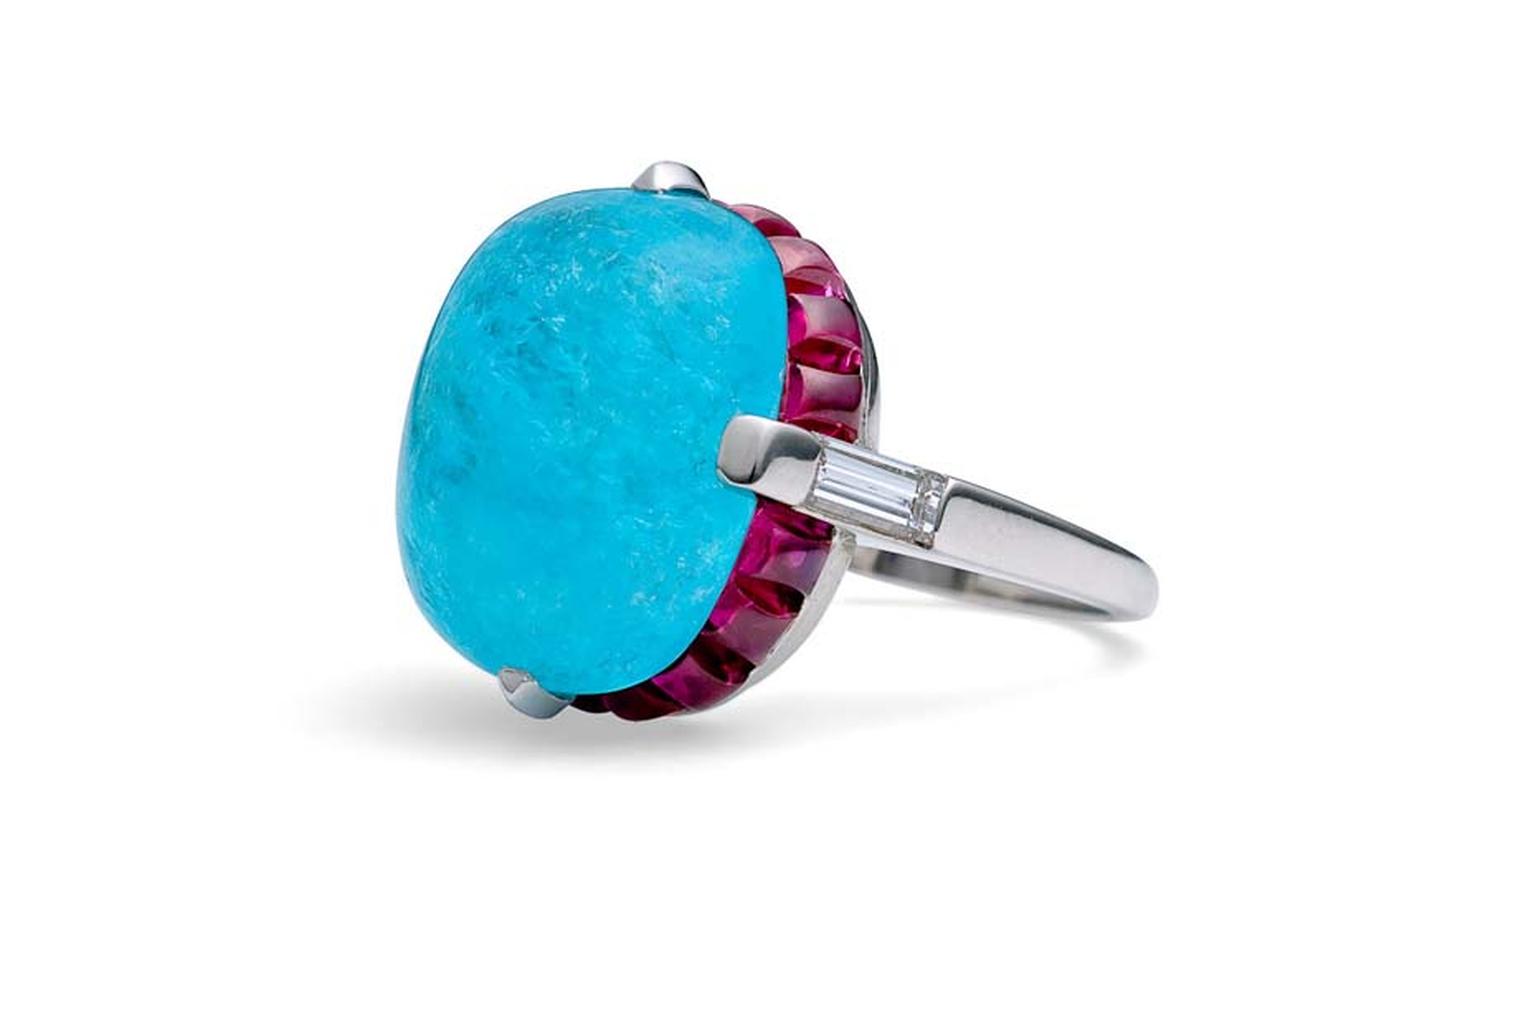 Steven Fox handmade platinum ring with a central 14.04ct Paraiba tourmaline surrounded by natural sugarloaf Burmese rubies and baguette diamonds.